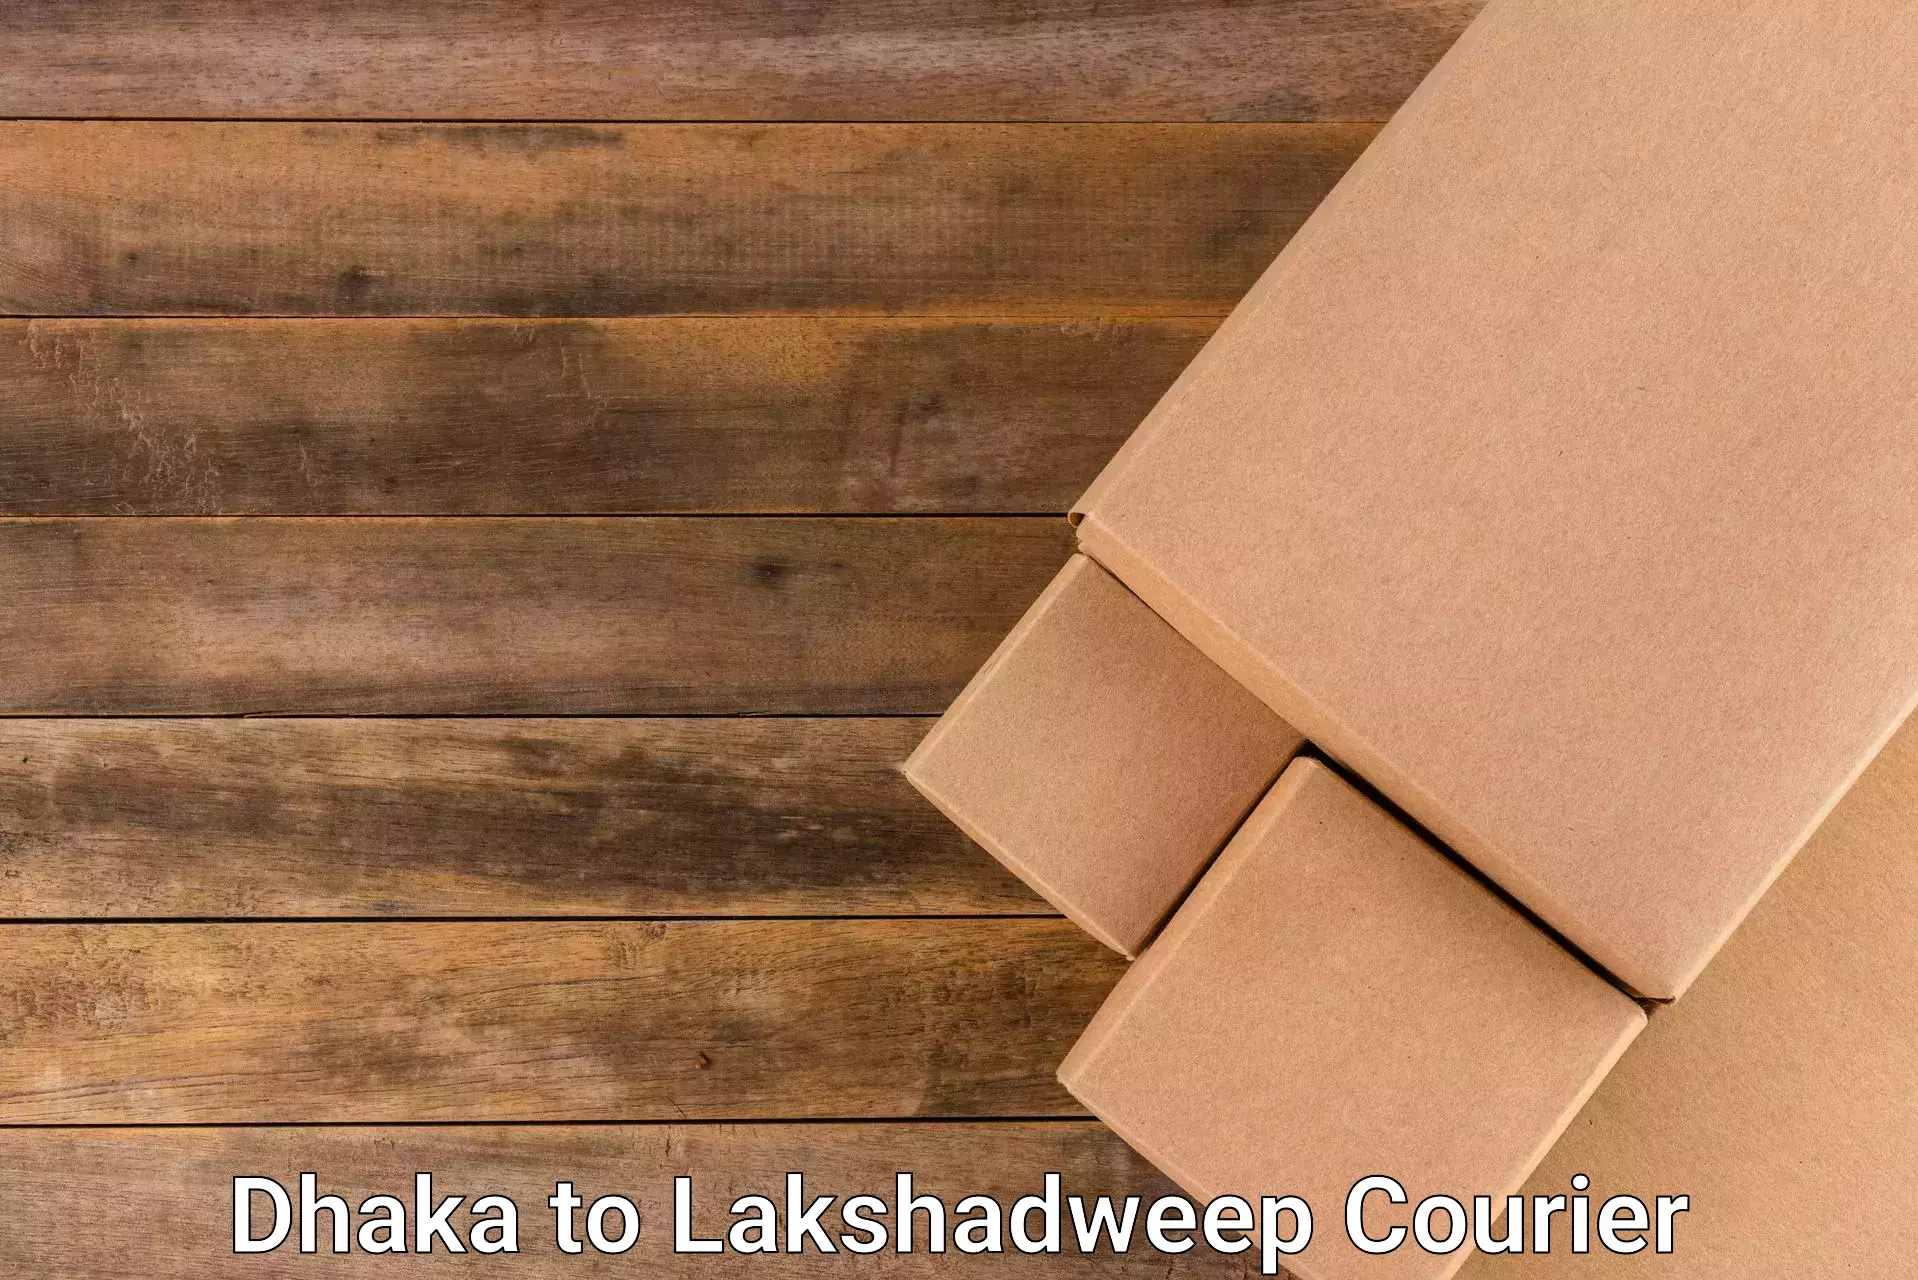 Courier service innovation Dhaka to Lakshadweep